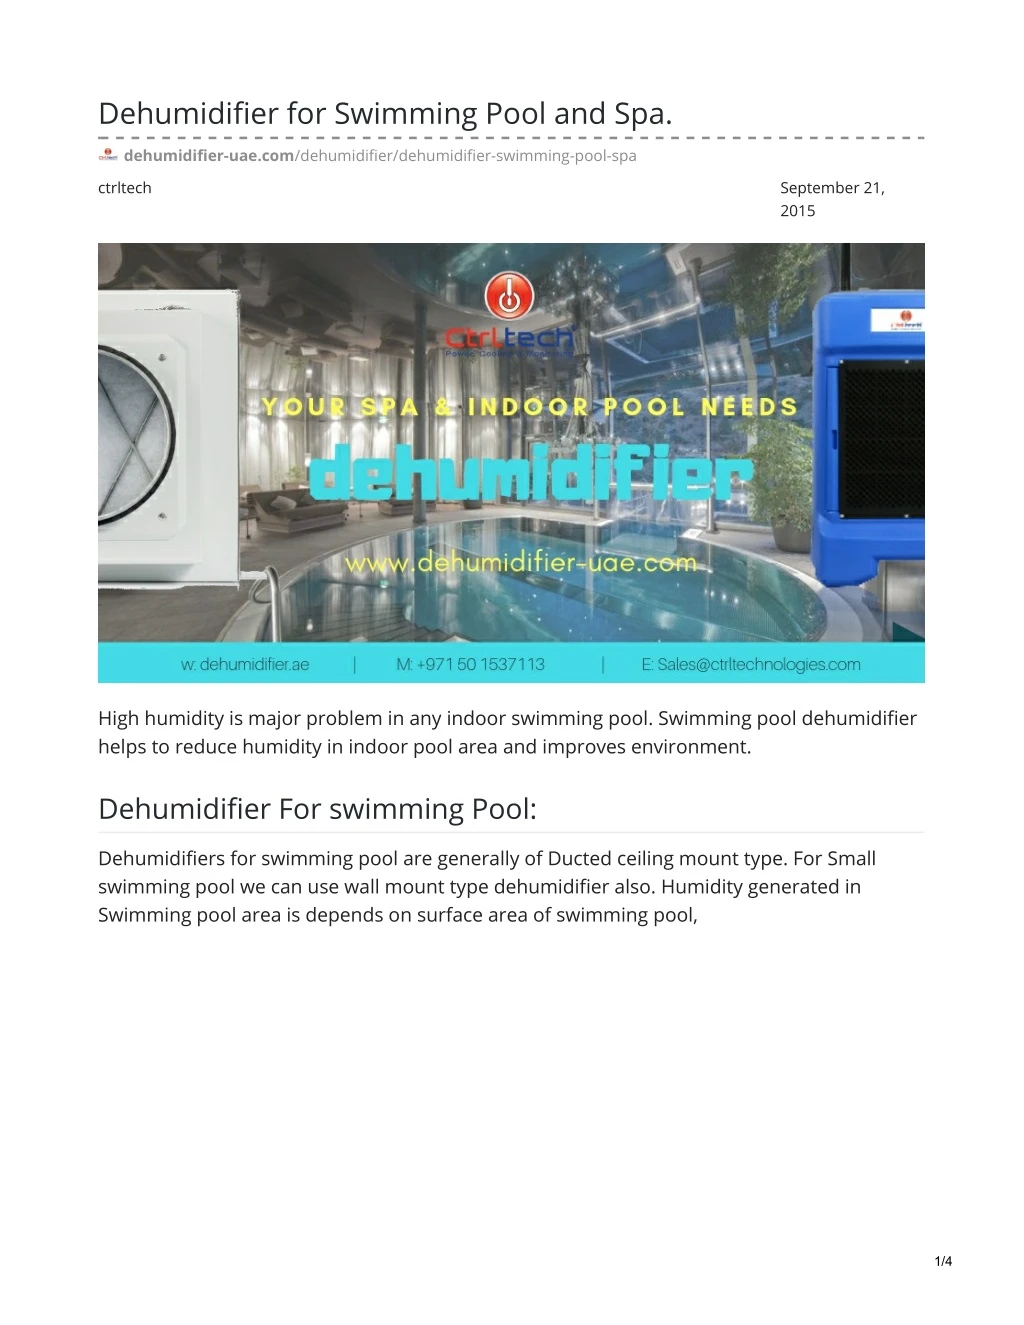 dehumidifier for swimming pool and spa